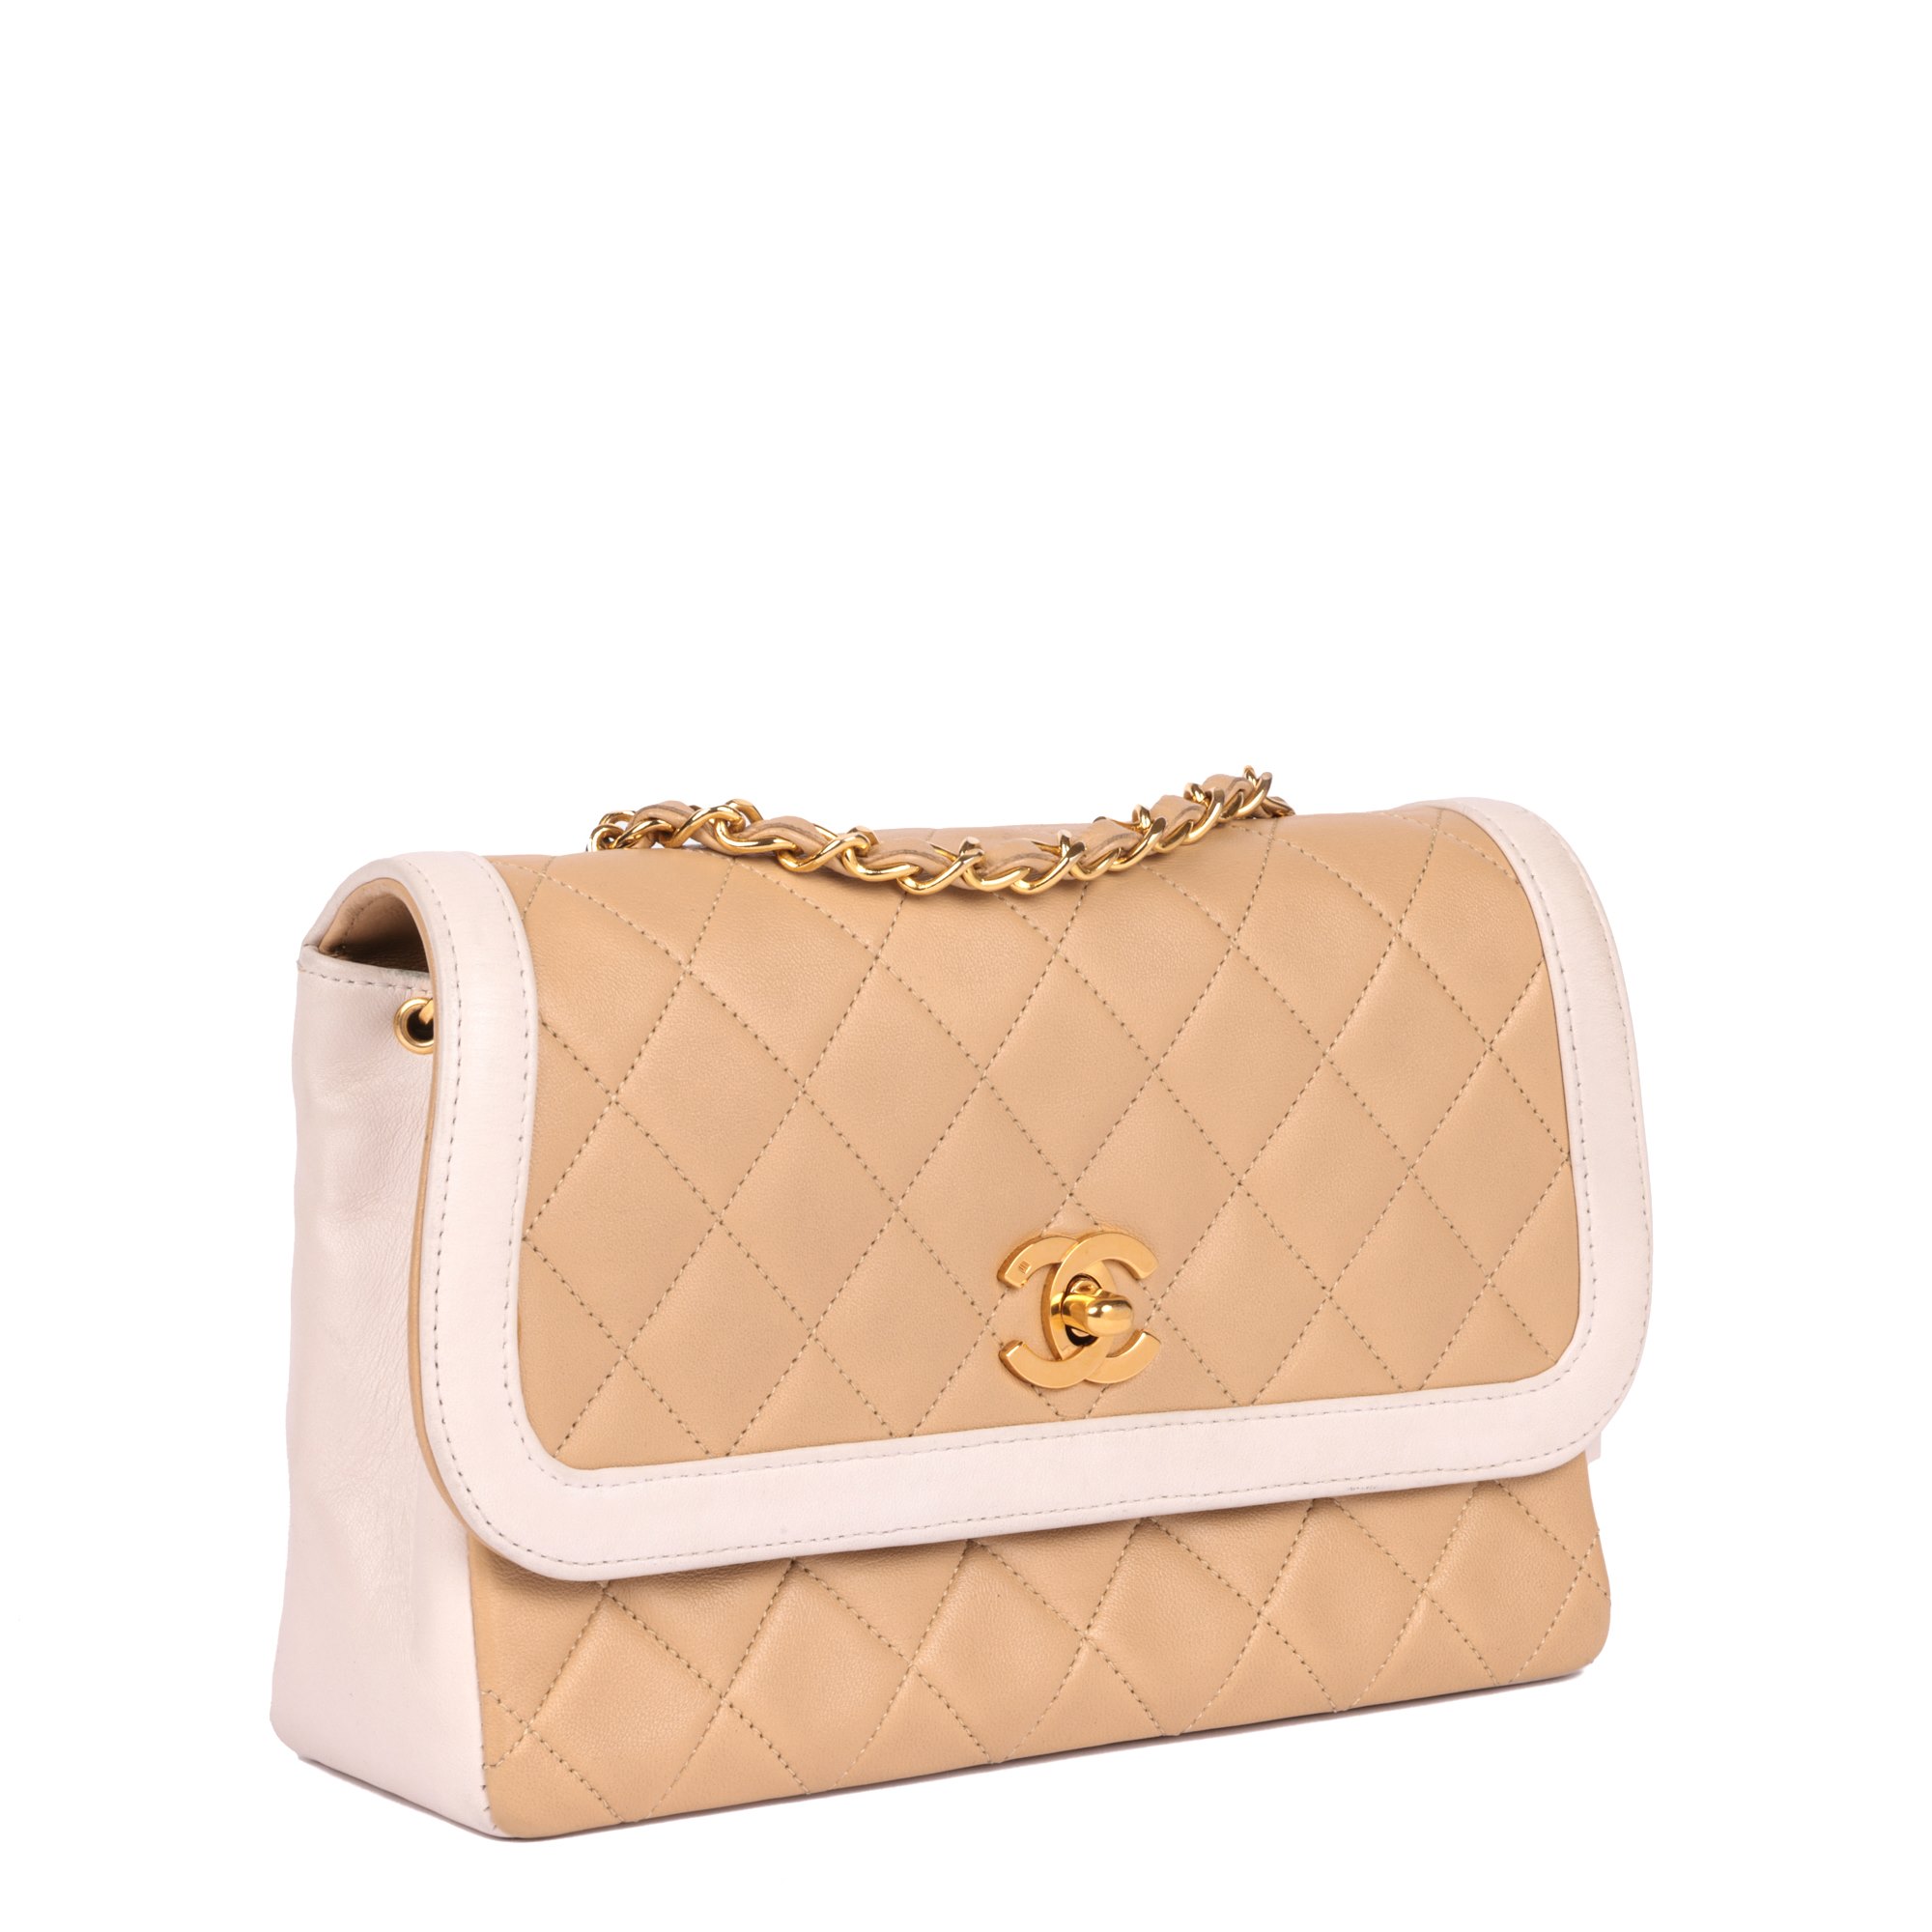 Chanel Beige & White Quilted Lambskin Vintage Mini Classic Single Flap Bag with Wallet